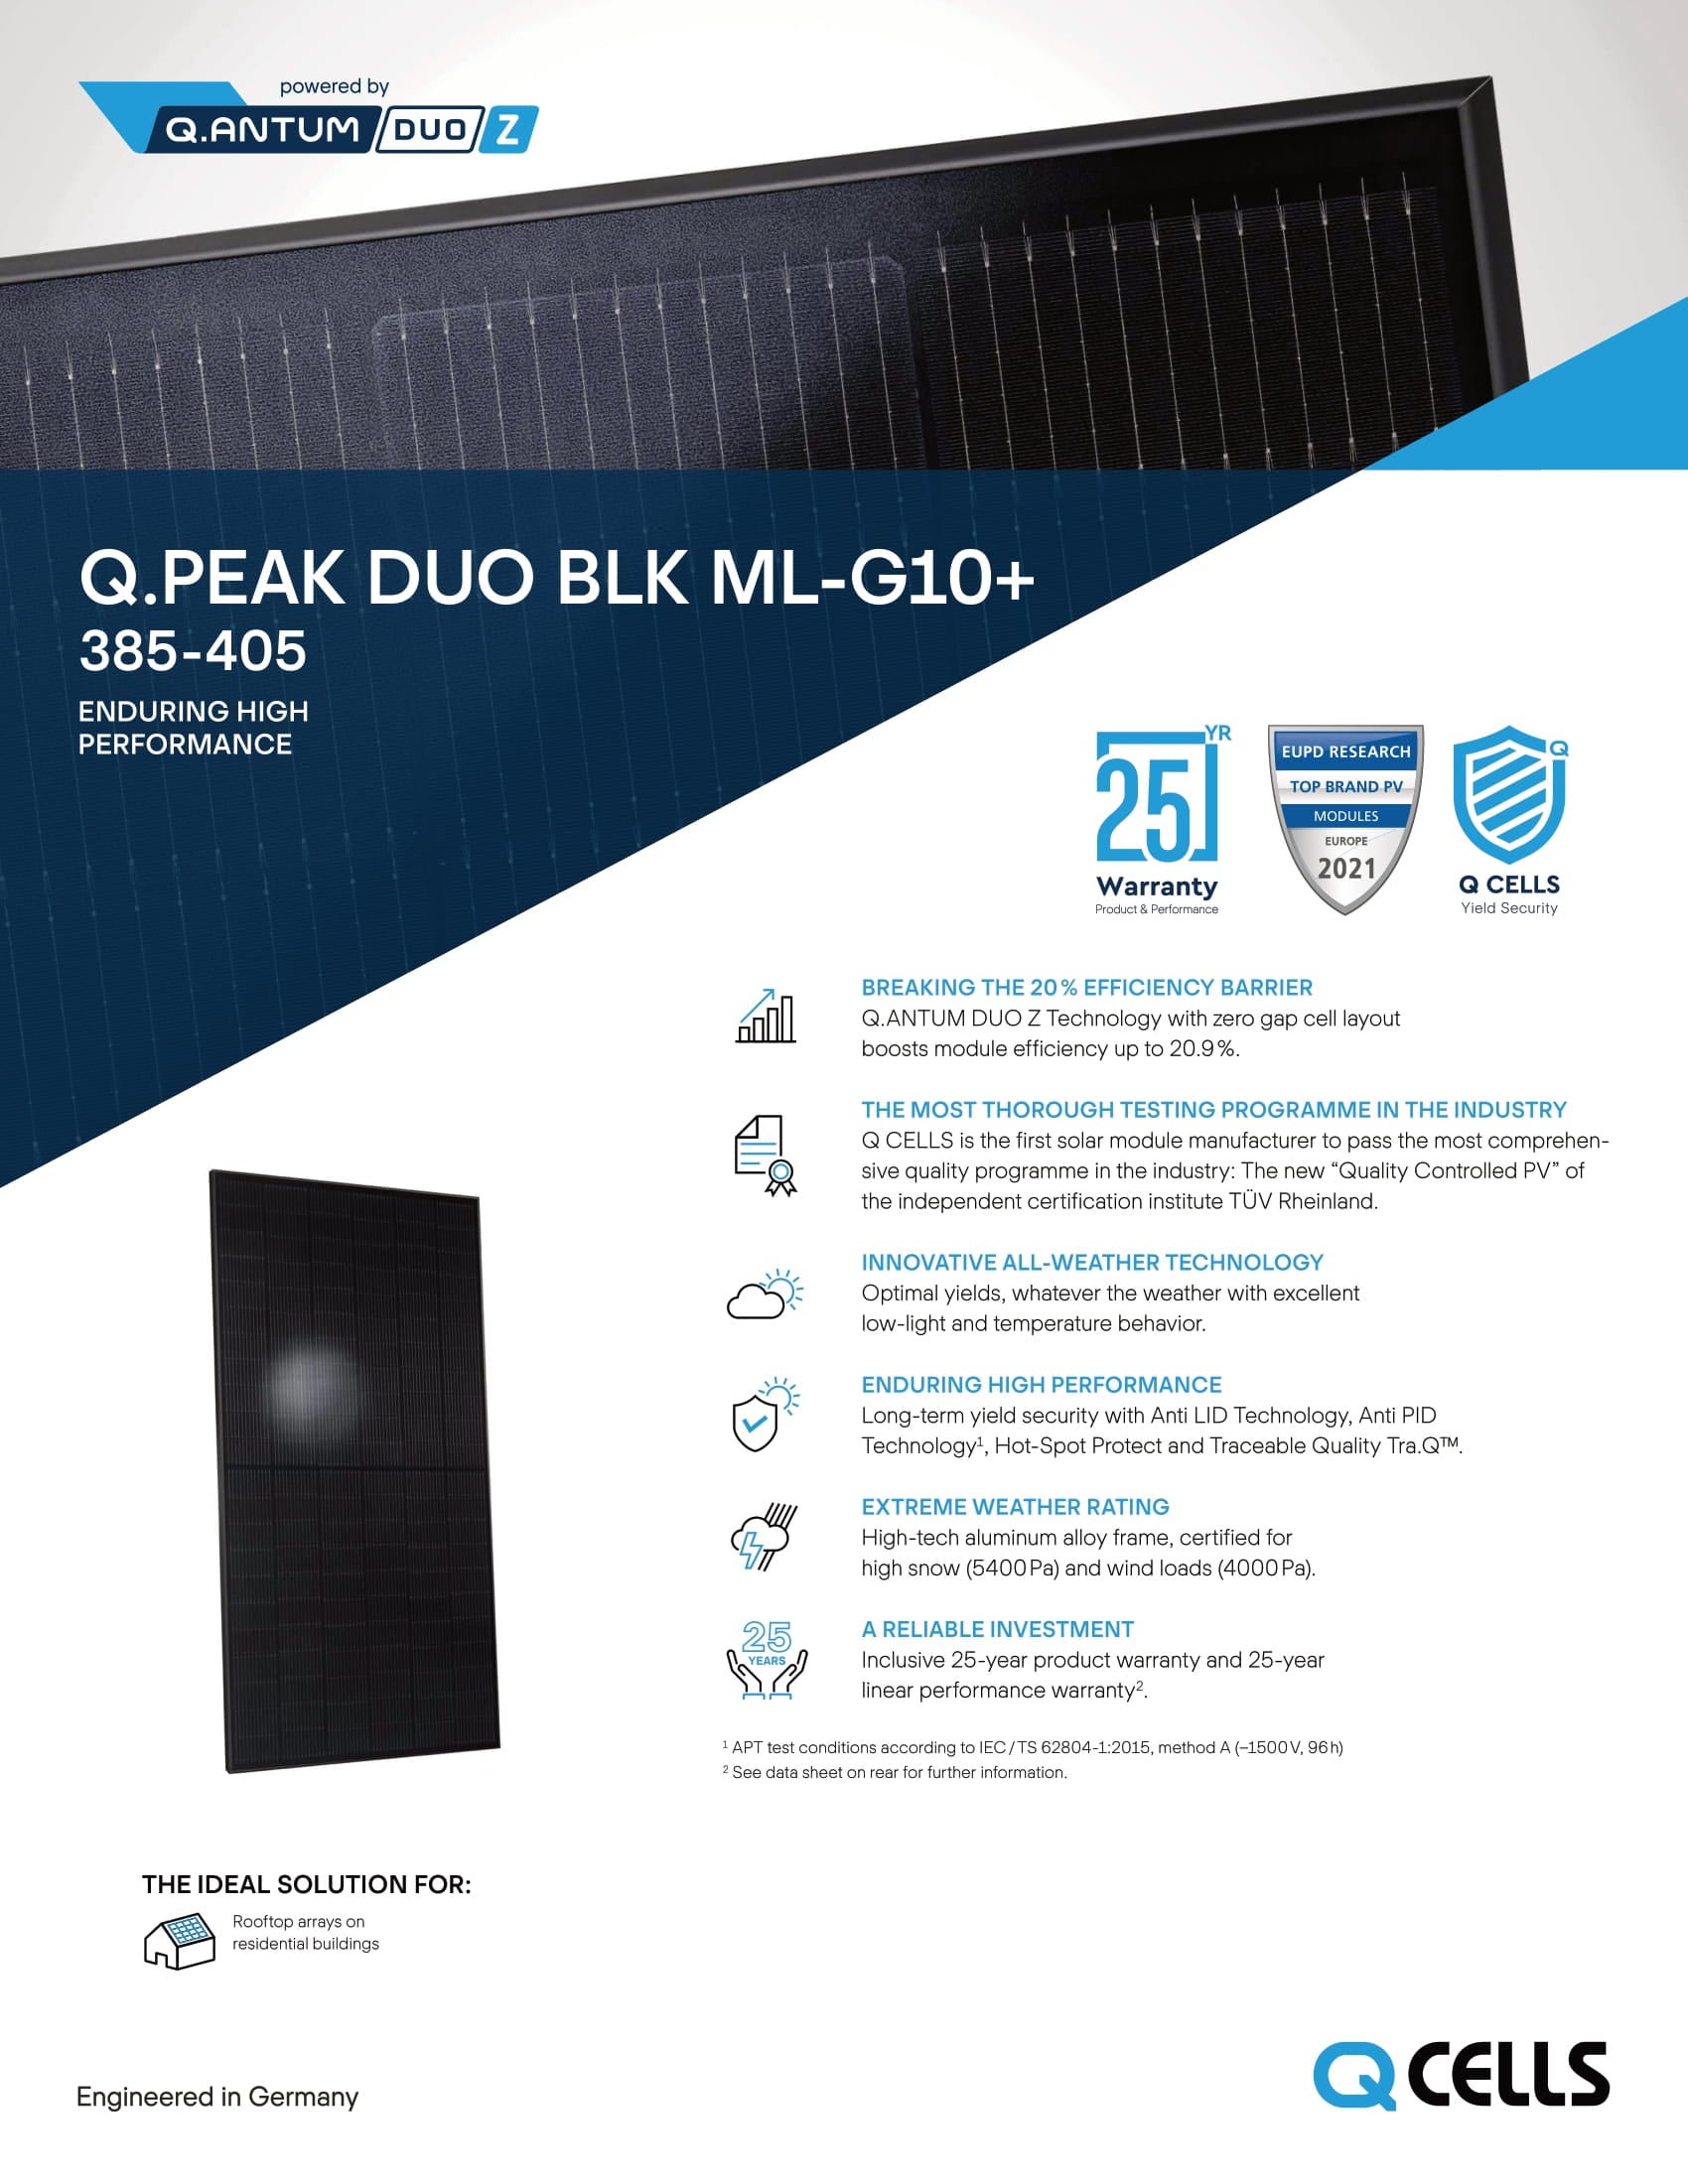 Q Cells - 12x Panels -  Q.PEAK DUO BLK-G10+ 395W - 66 Cell  | 4-8 Weeks Ship Time